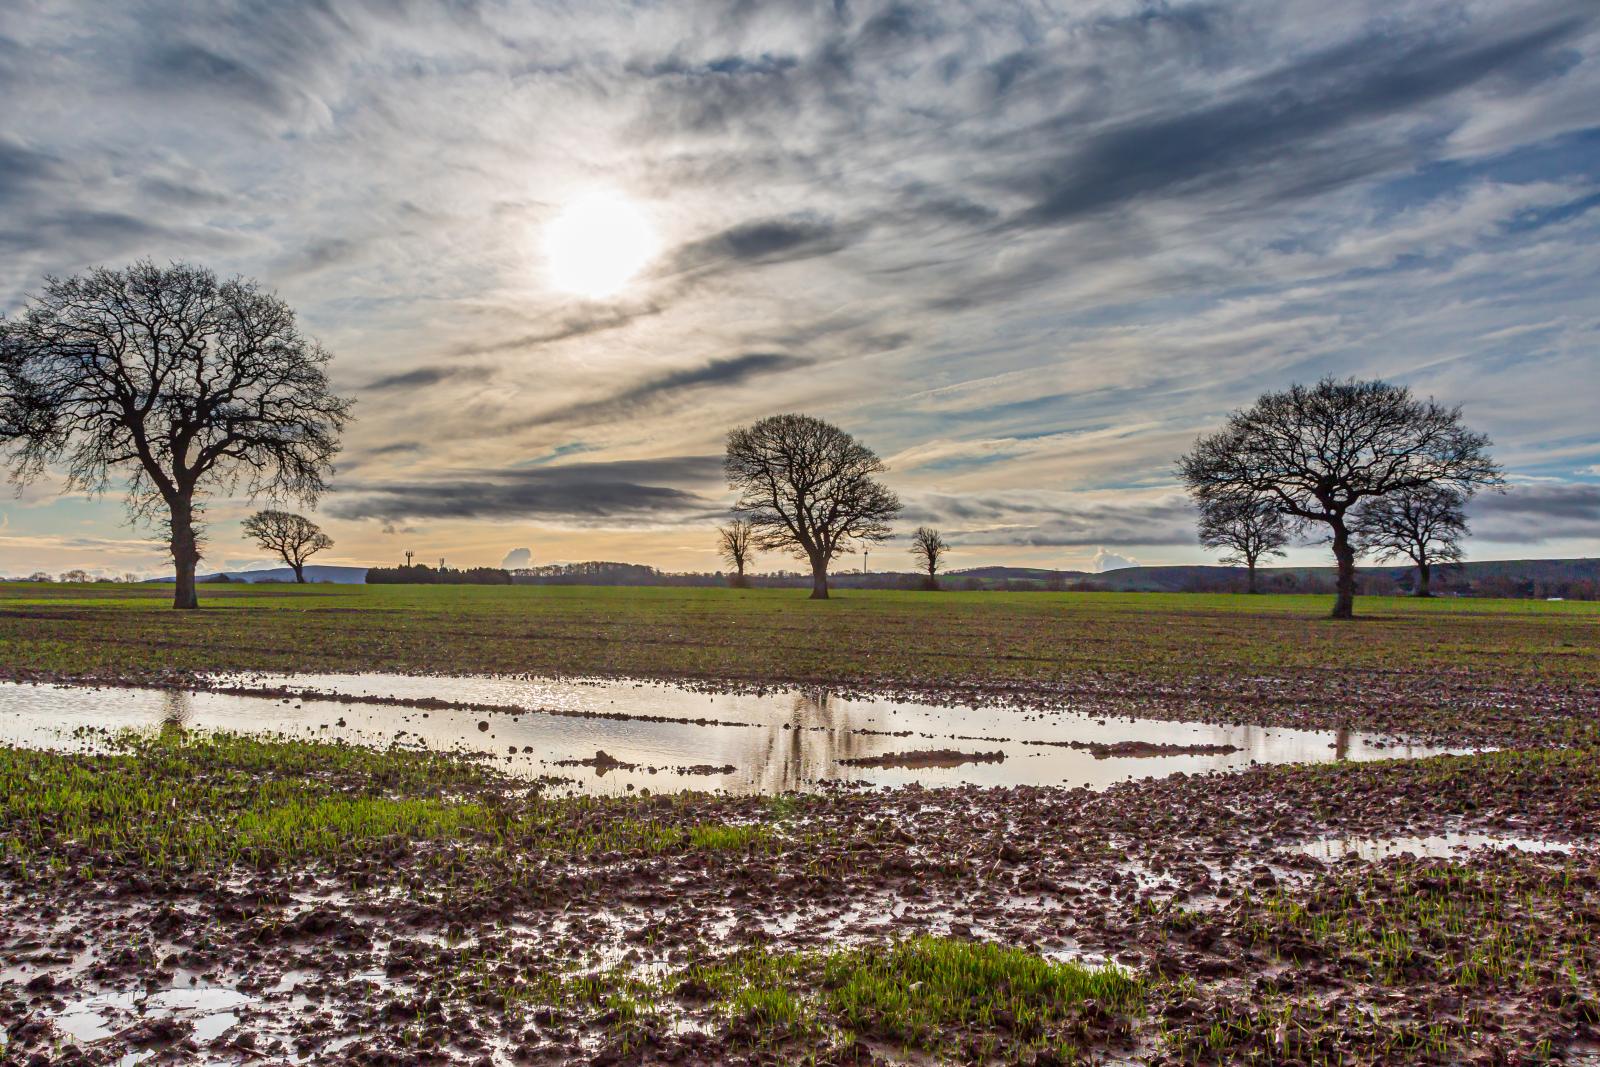 More Rain on the Way: Wet Outlook for Britain